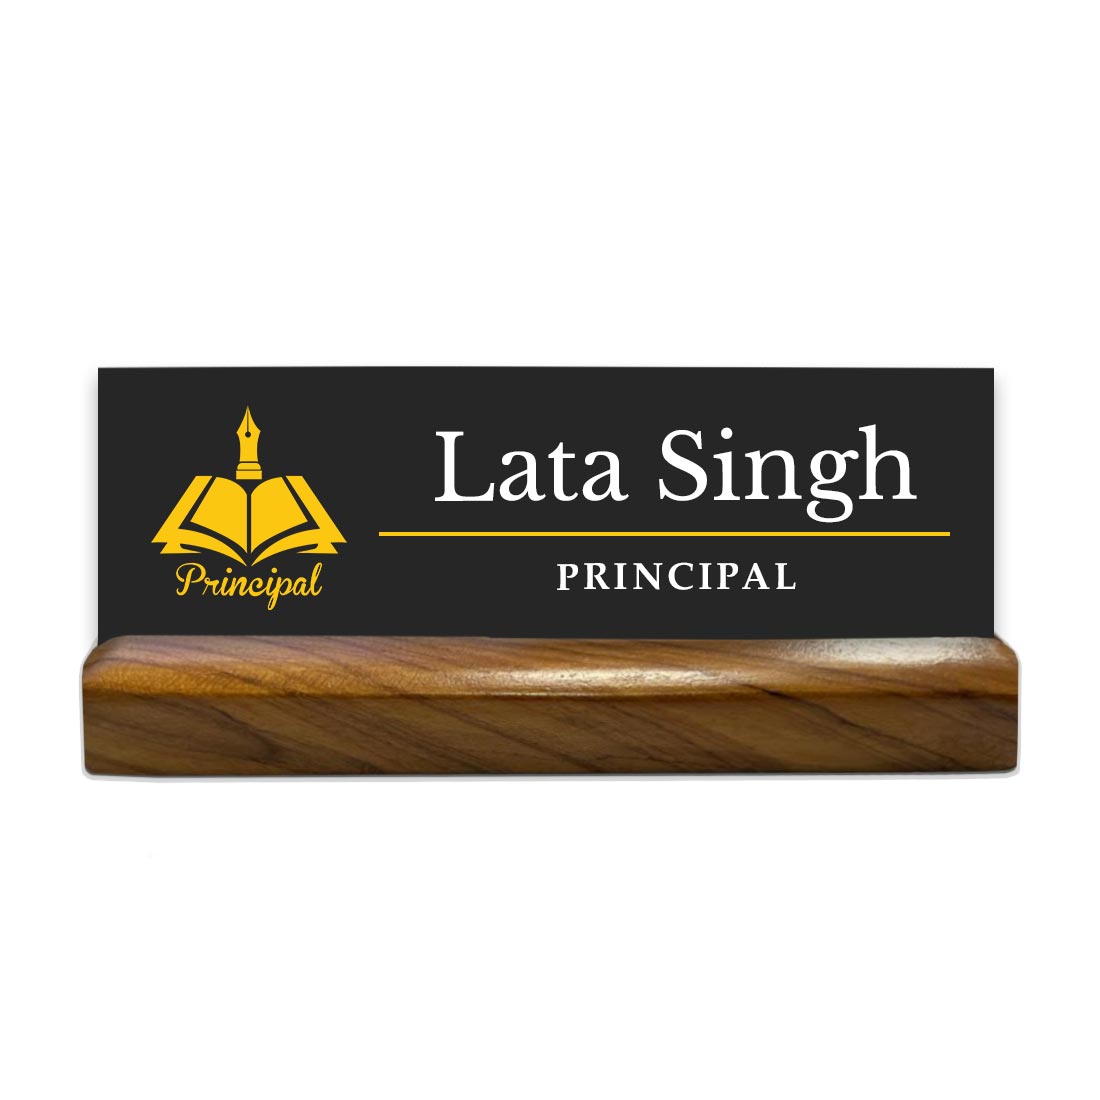 Personalized Desk Name Plate For Teachers Office With a Wooden Stand